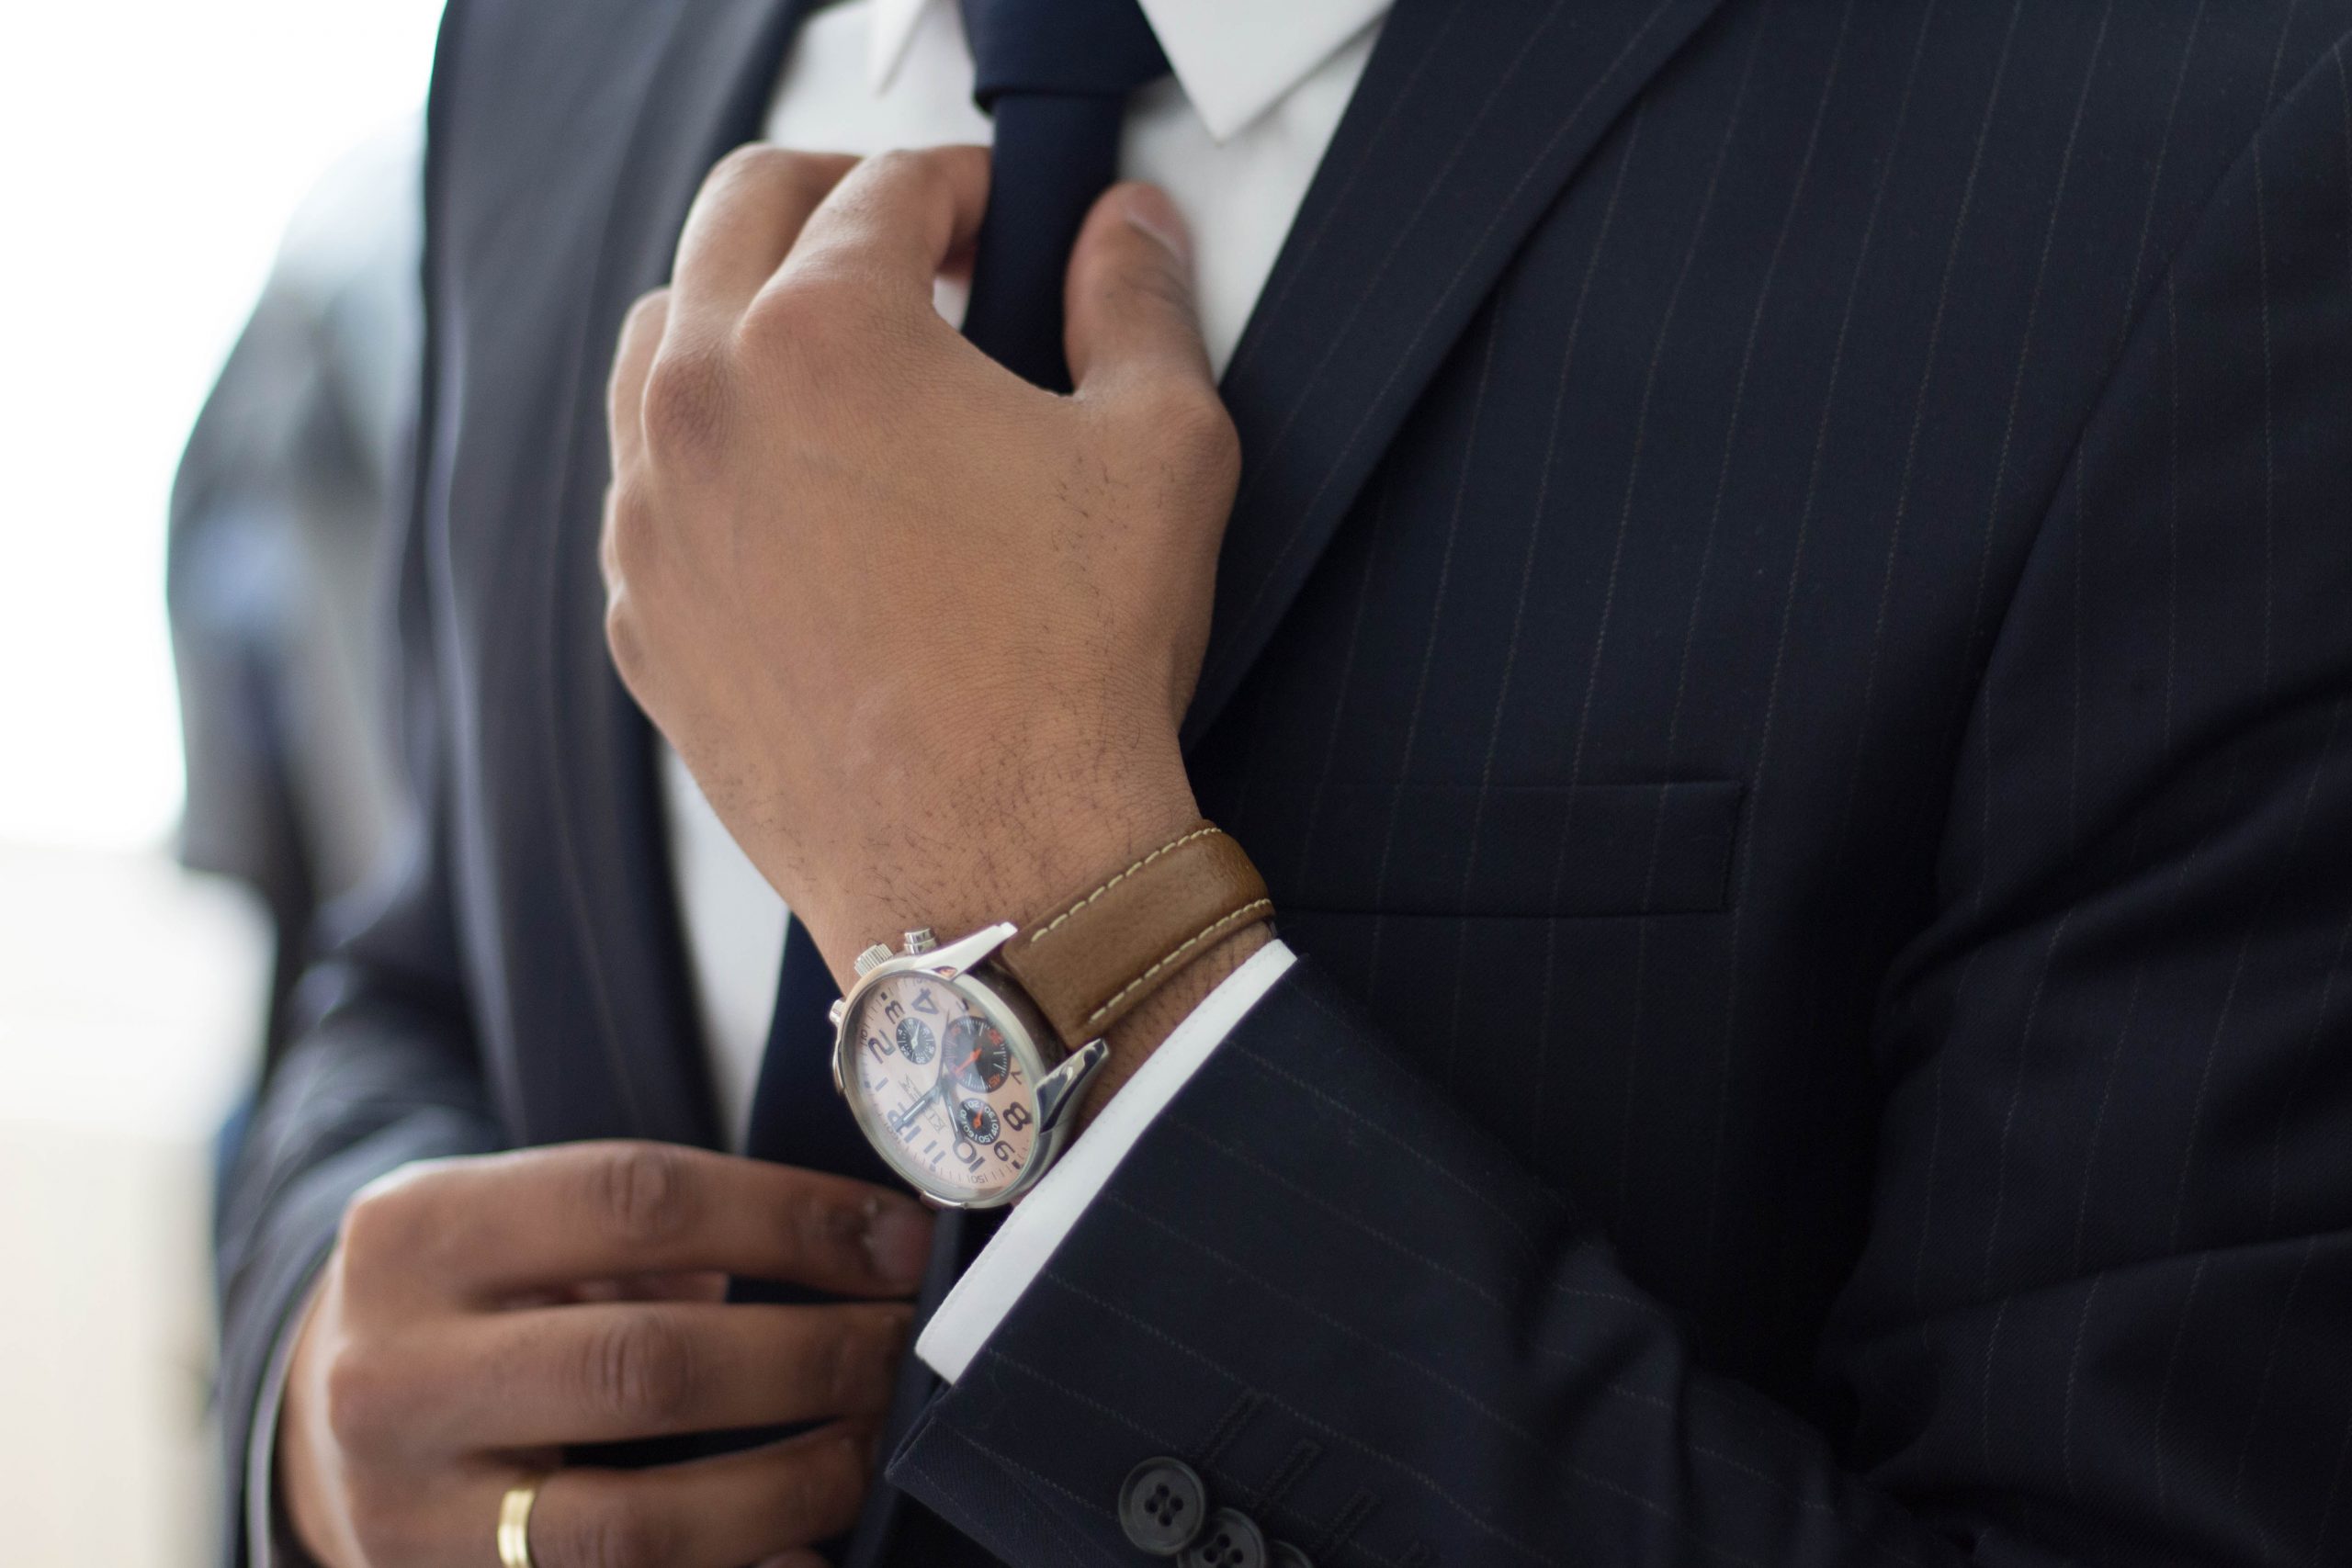 employment attorney man wearing watch with black suit